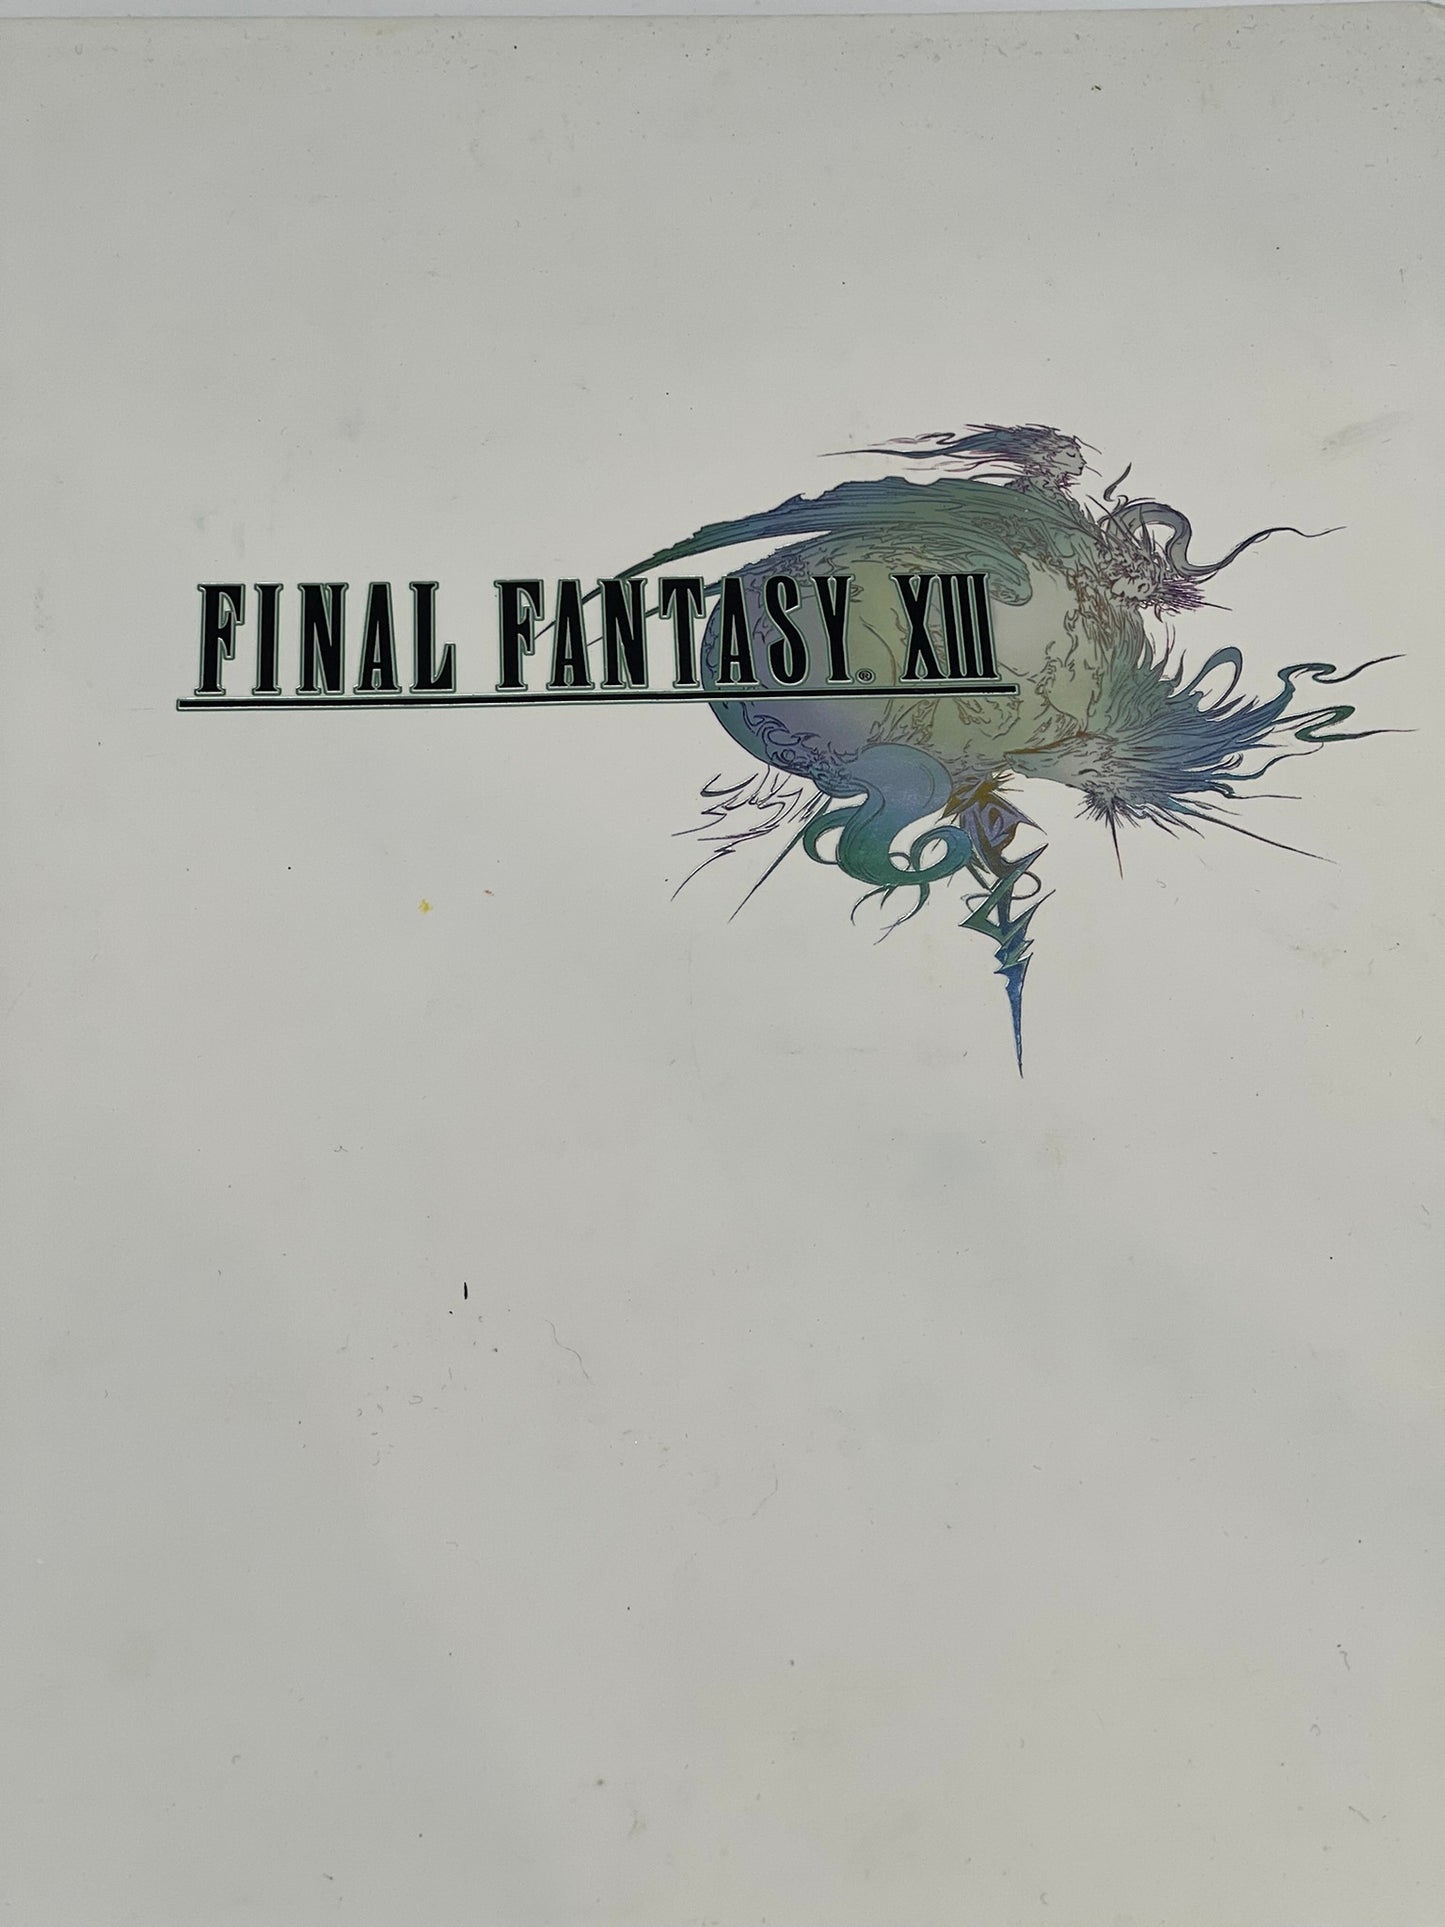 Final Fantasy XIII 13 Hardcover The Complete Official Guide Collectors Edition